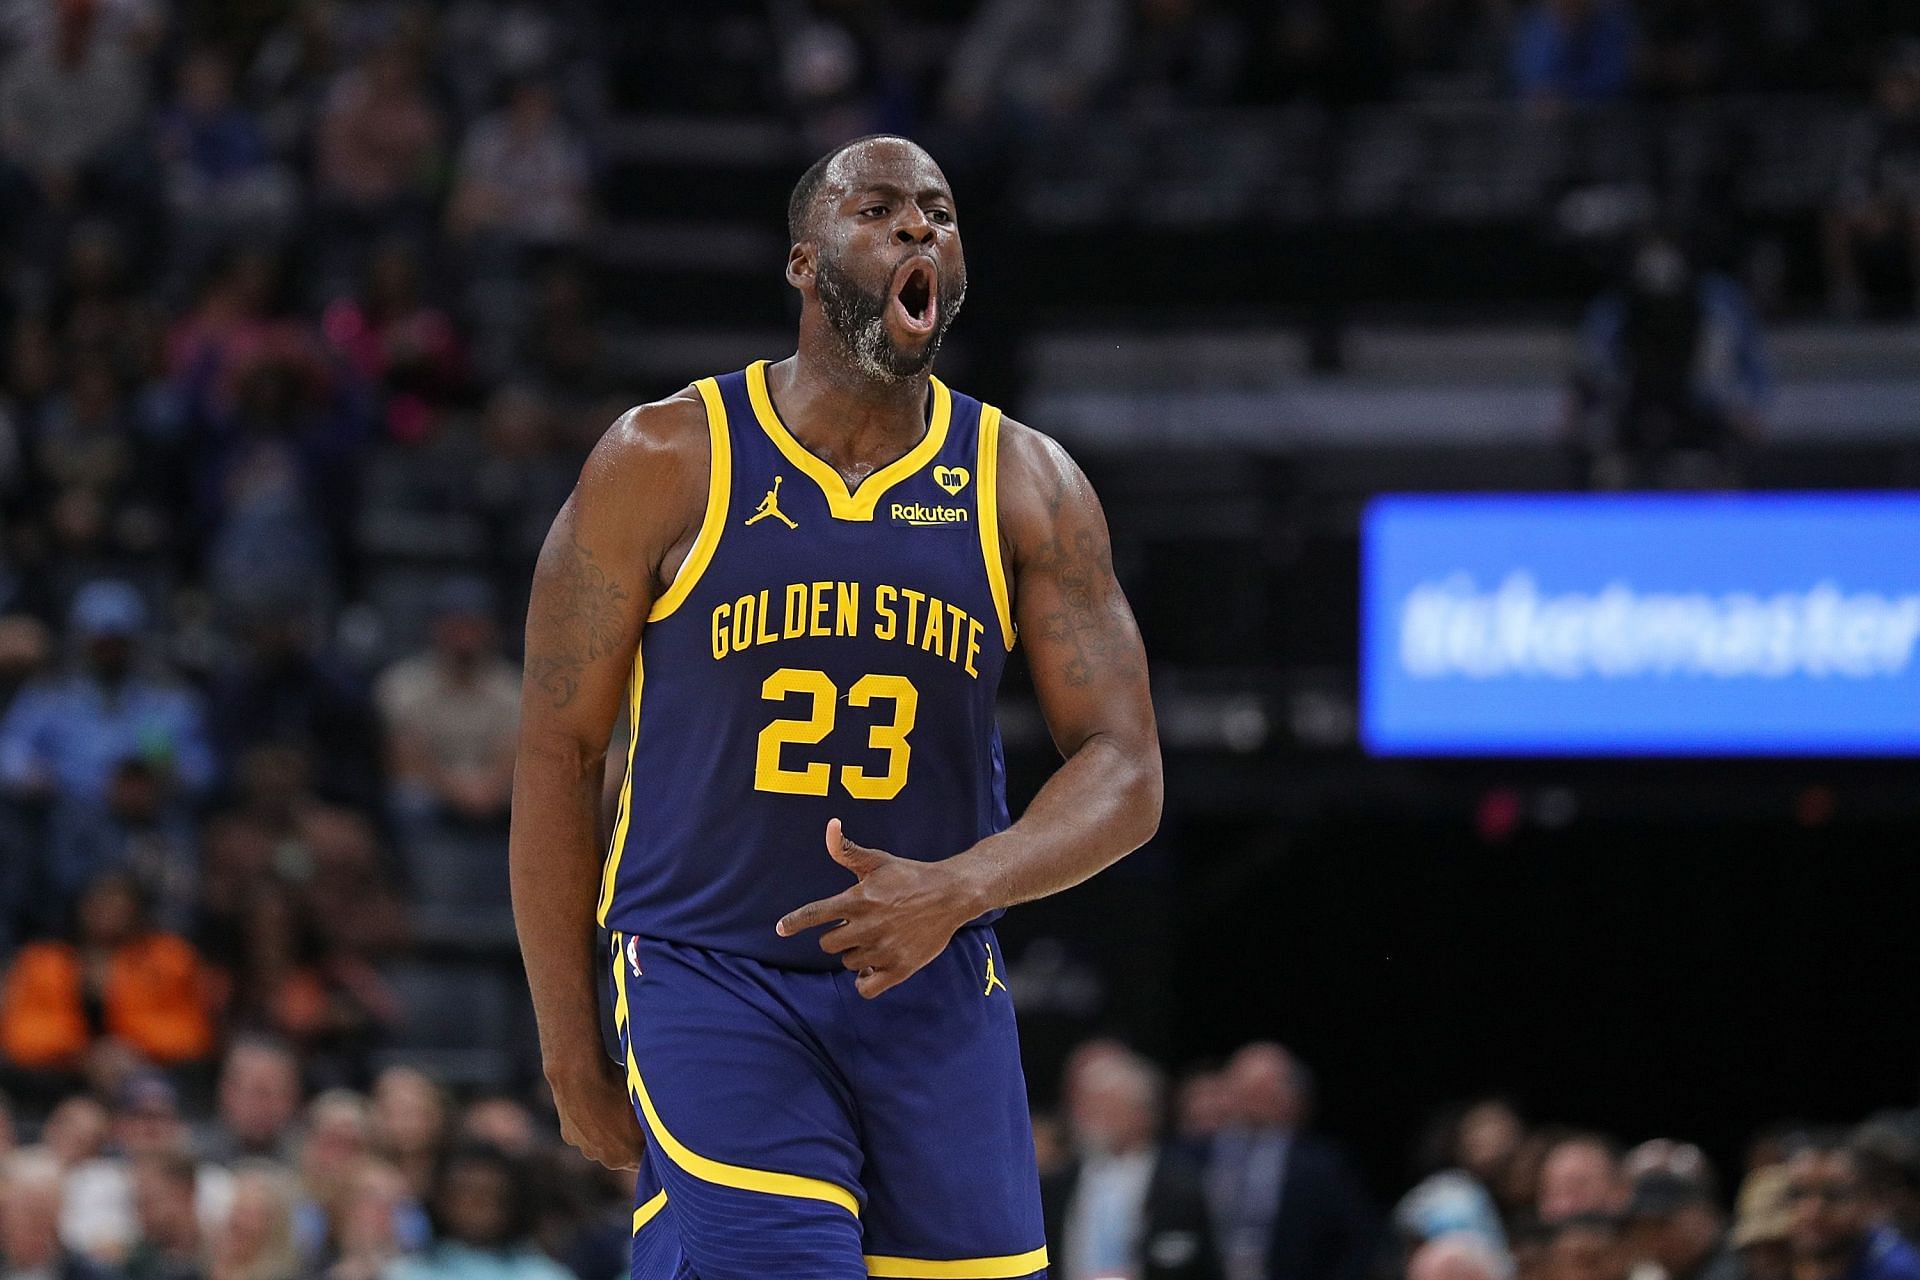 Draymond Green considered joining rival team in free agency.